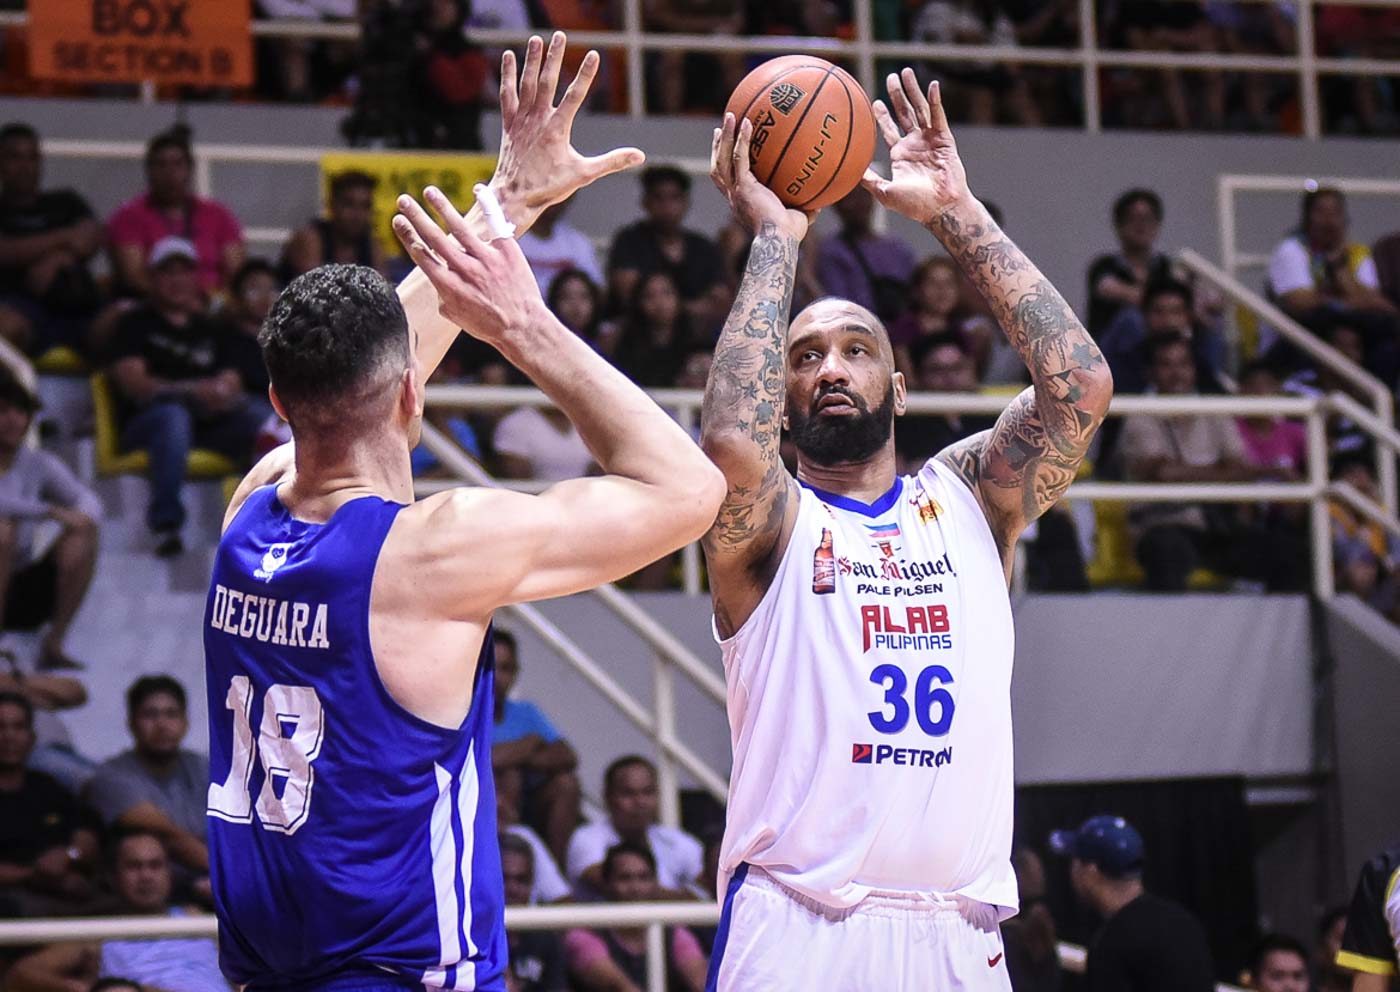 Alab Pilipinas blasts Hong Kong anew in battle of giants